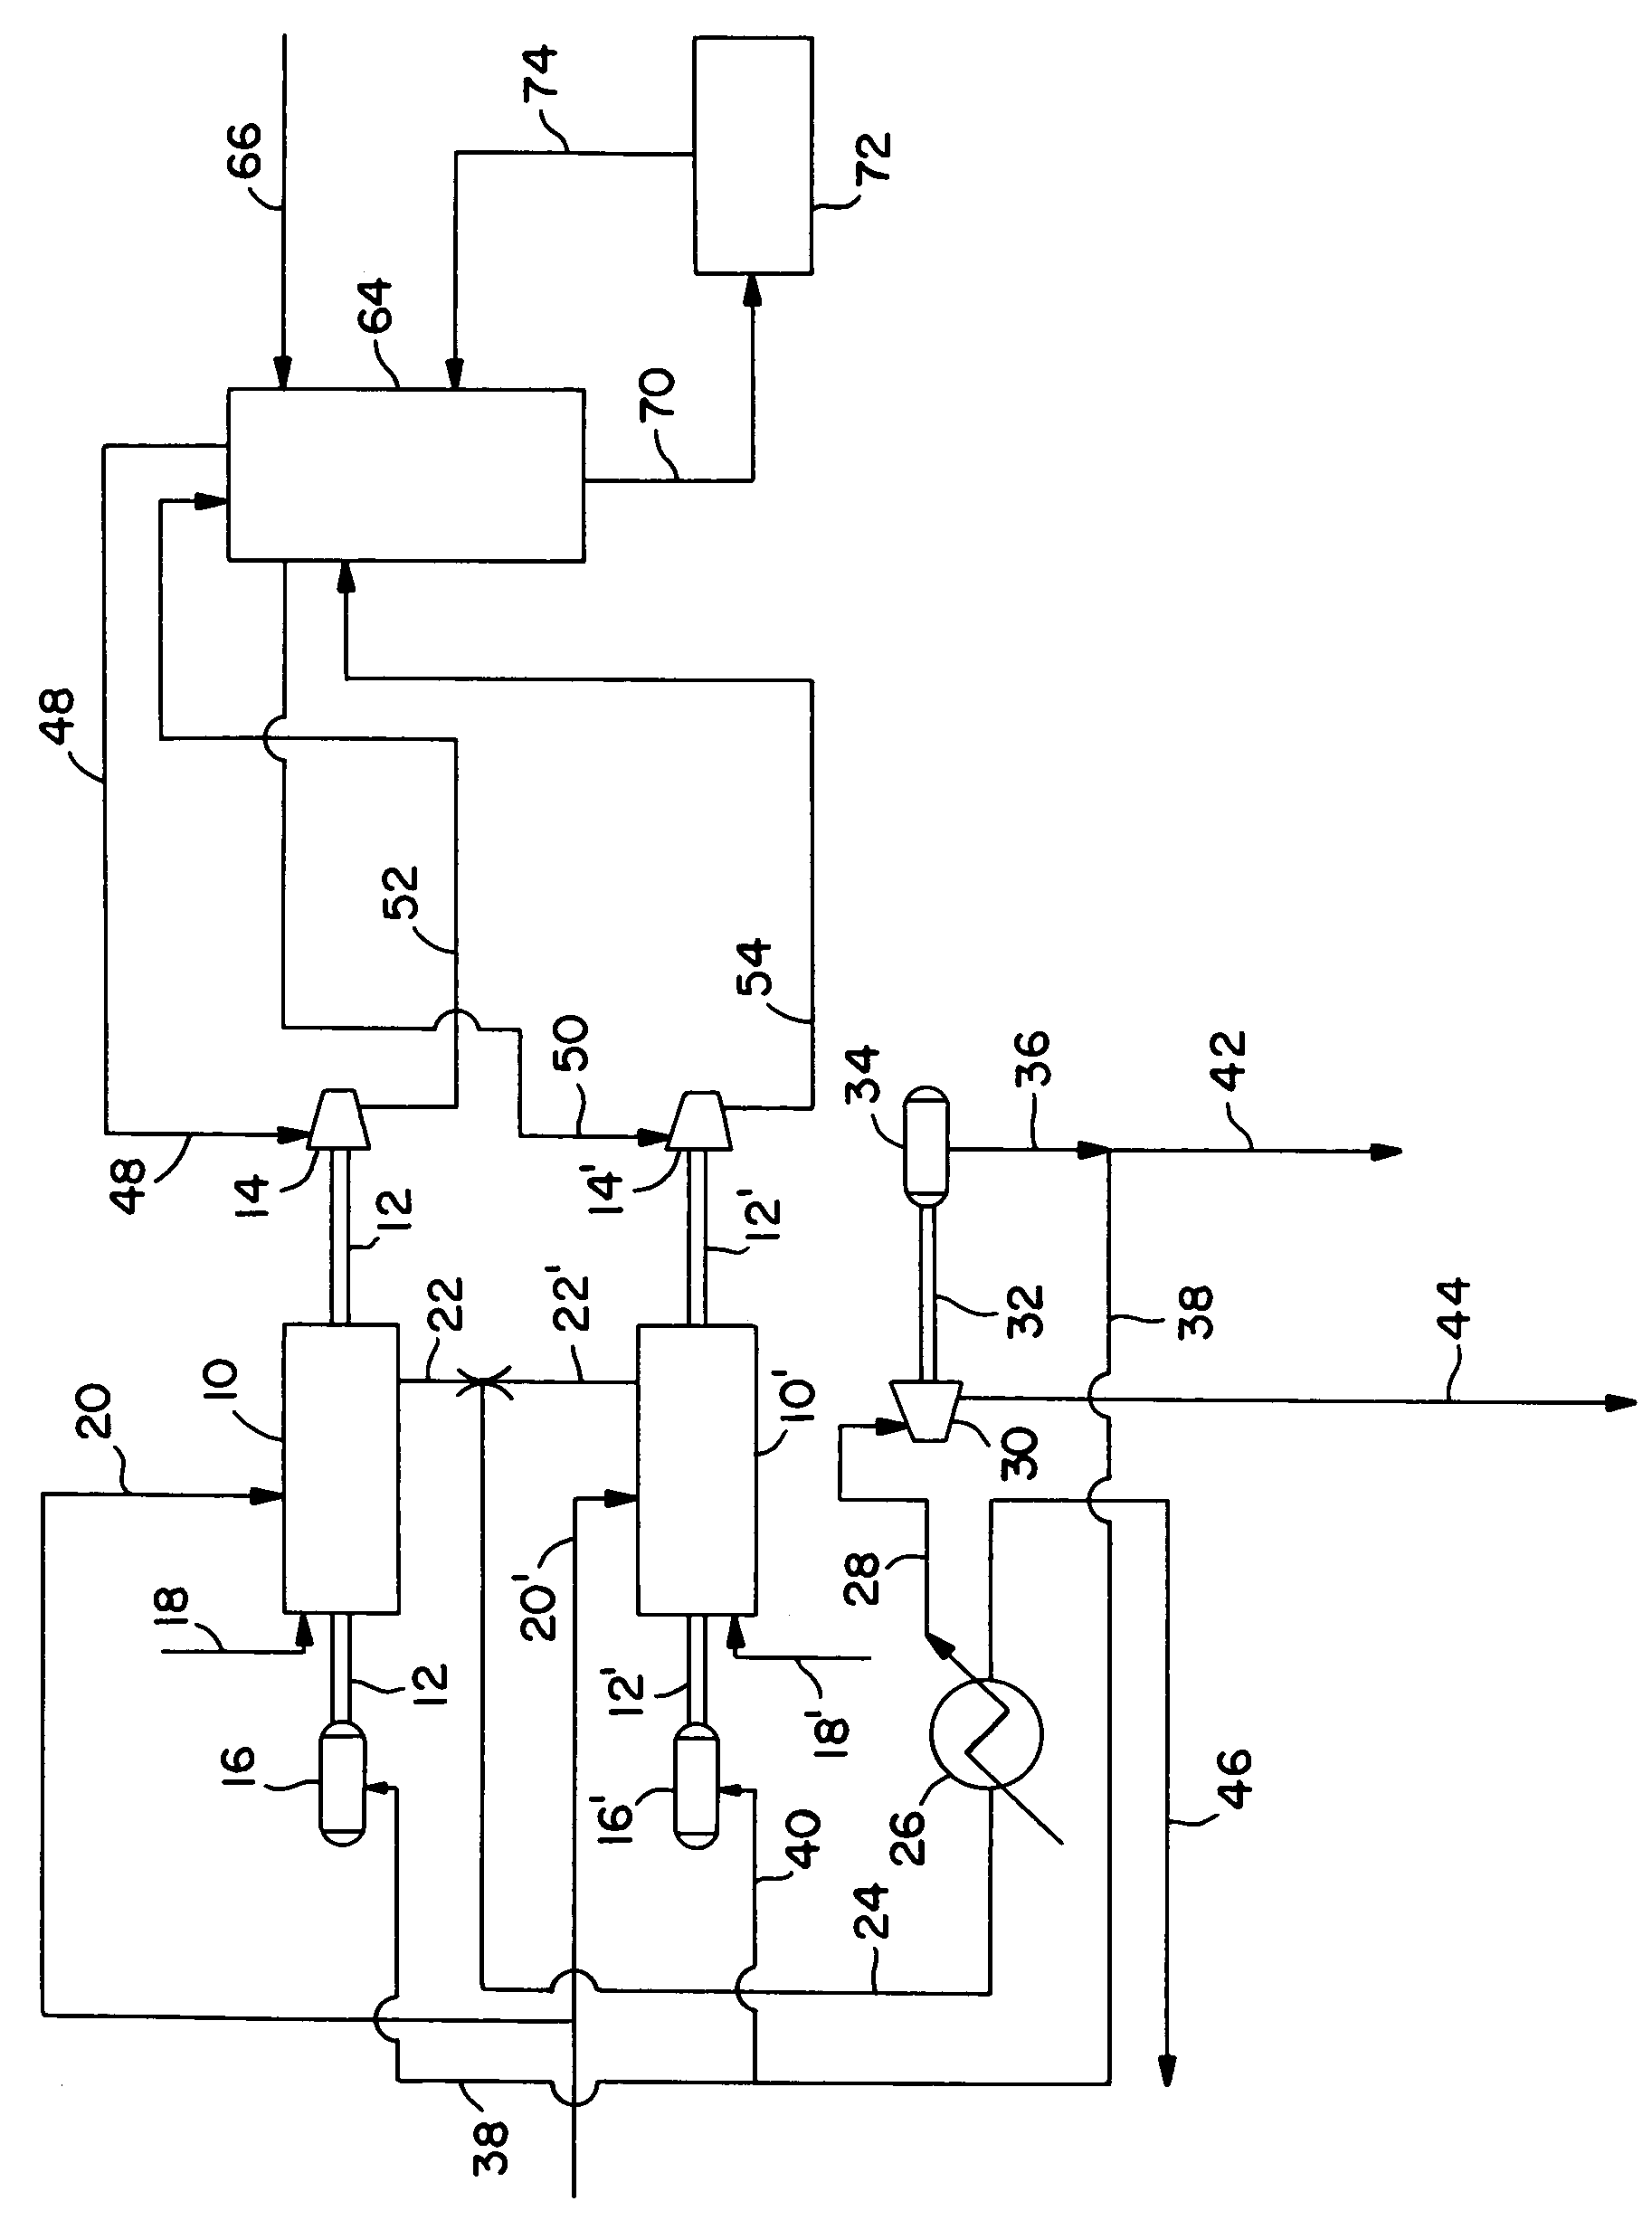 Reduced carbon dioxide emission system and method for providing power for refrigerant compression and electrical power for a light hydrocarbon gas liquefaction process